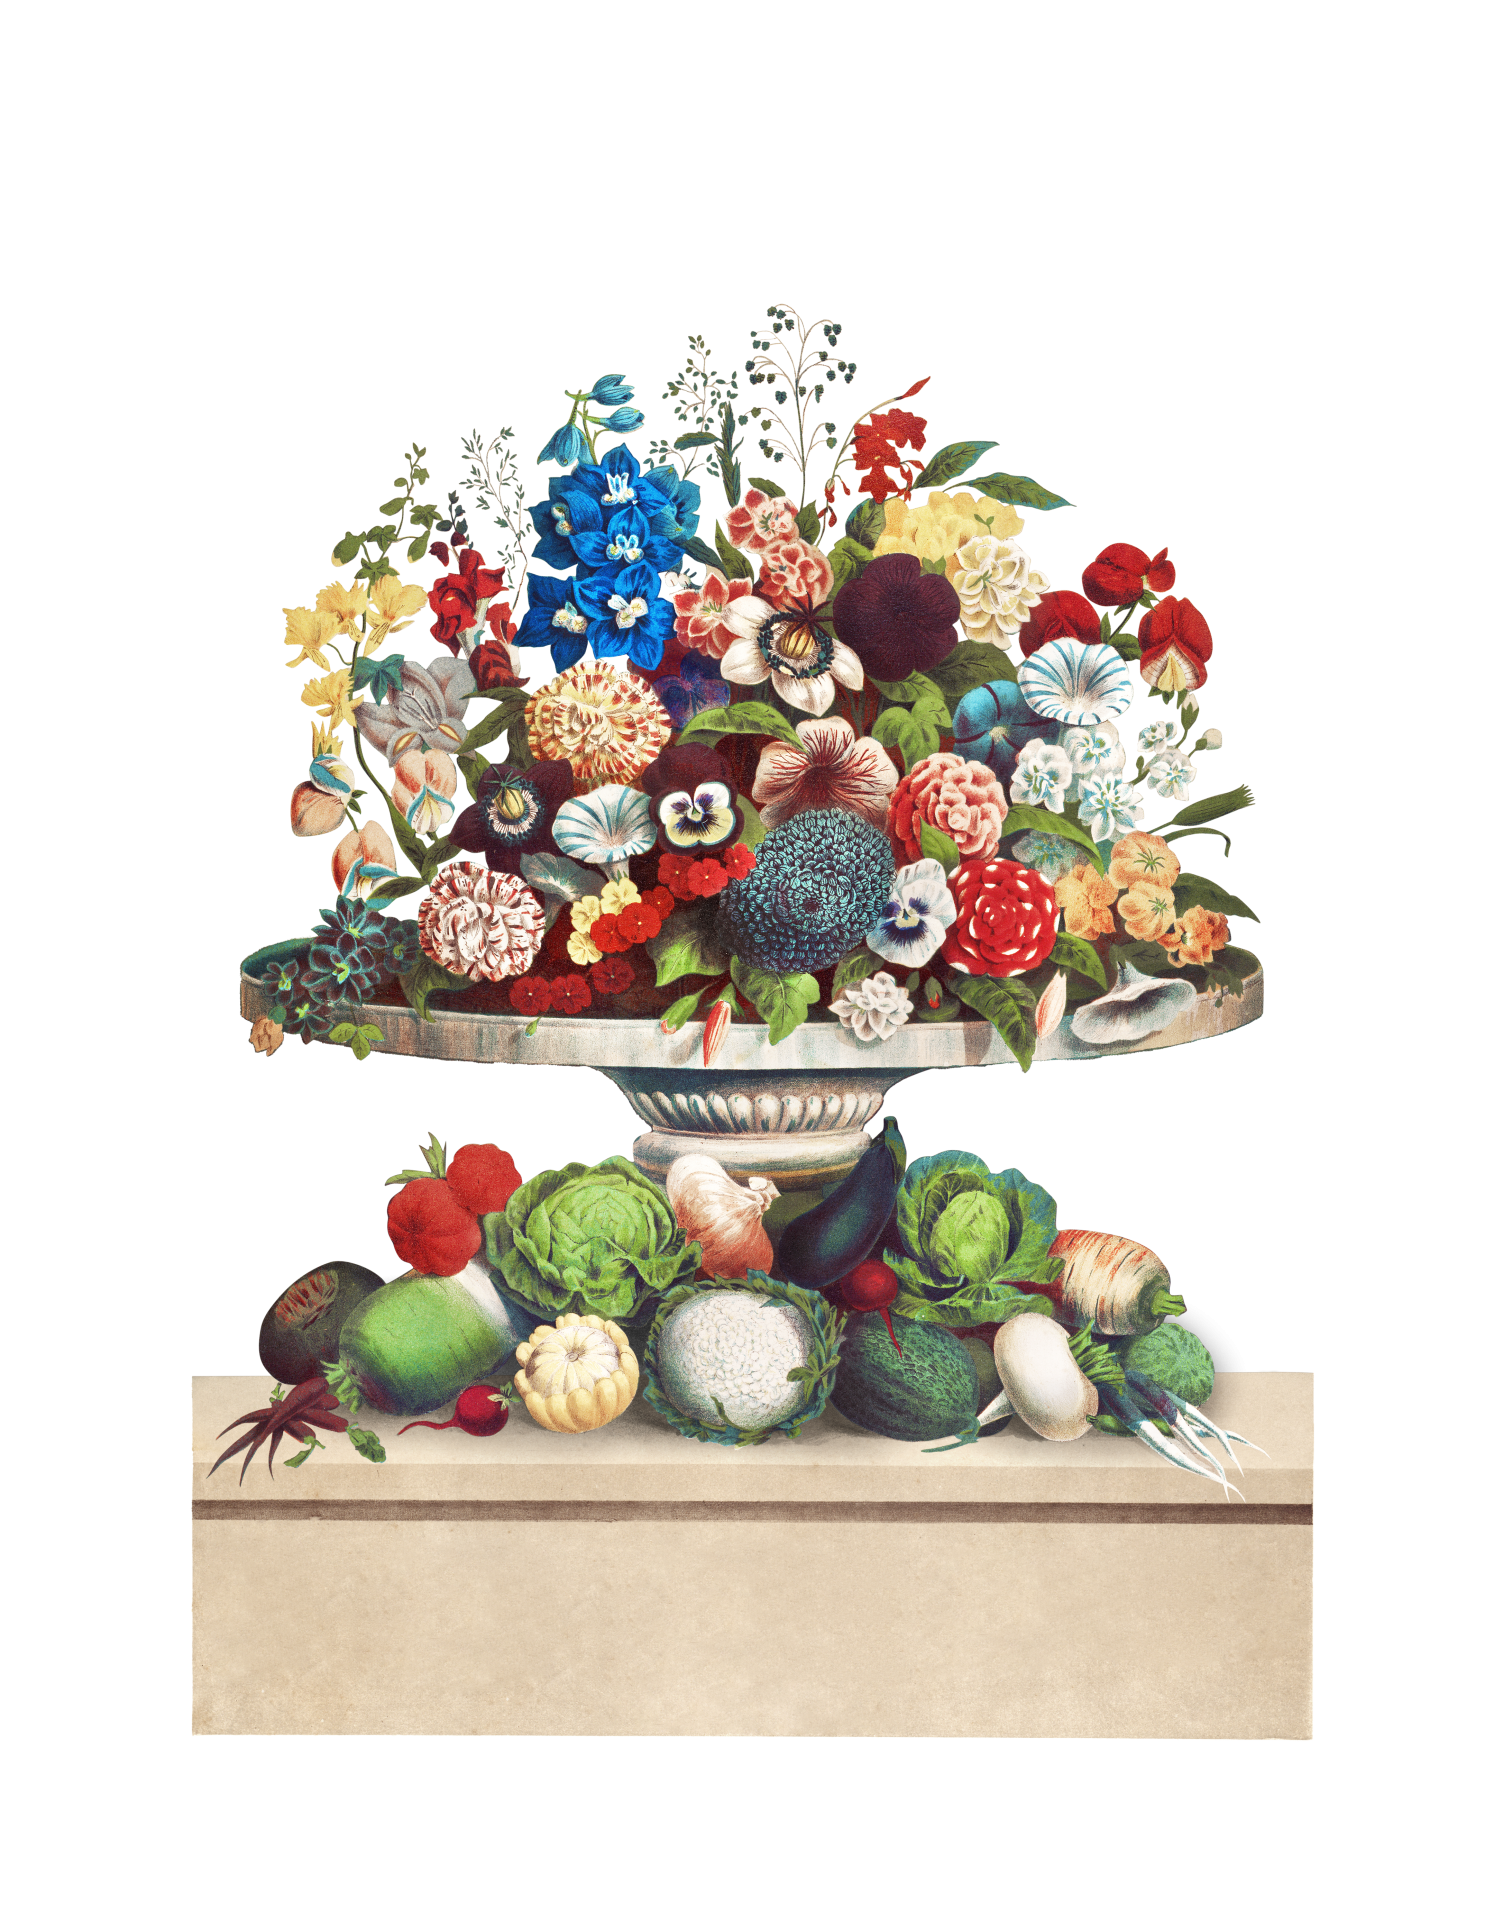 Fruits fruits vegetables salad assortment in ceramic bowl on marble table clipart with transparent background png vintage art old antique painting drawing colorful element cut out from a public domain illustration isolated sticker